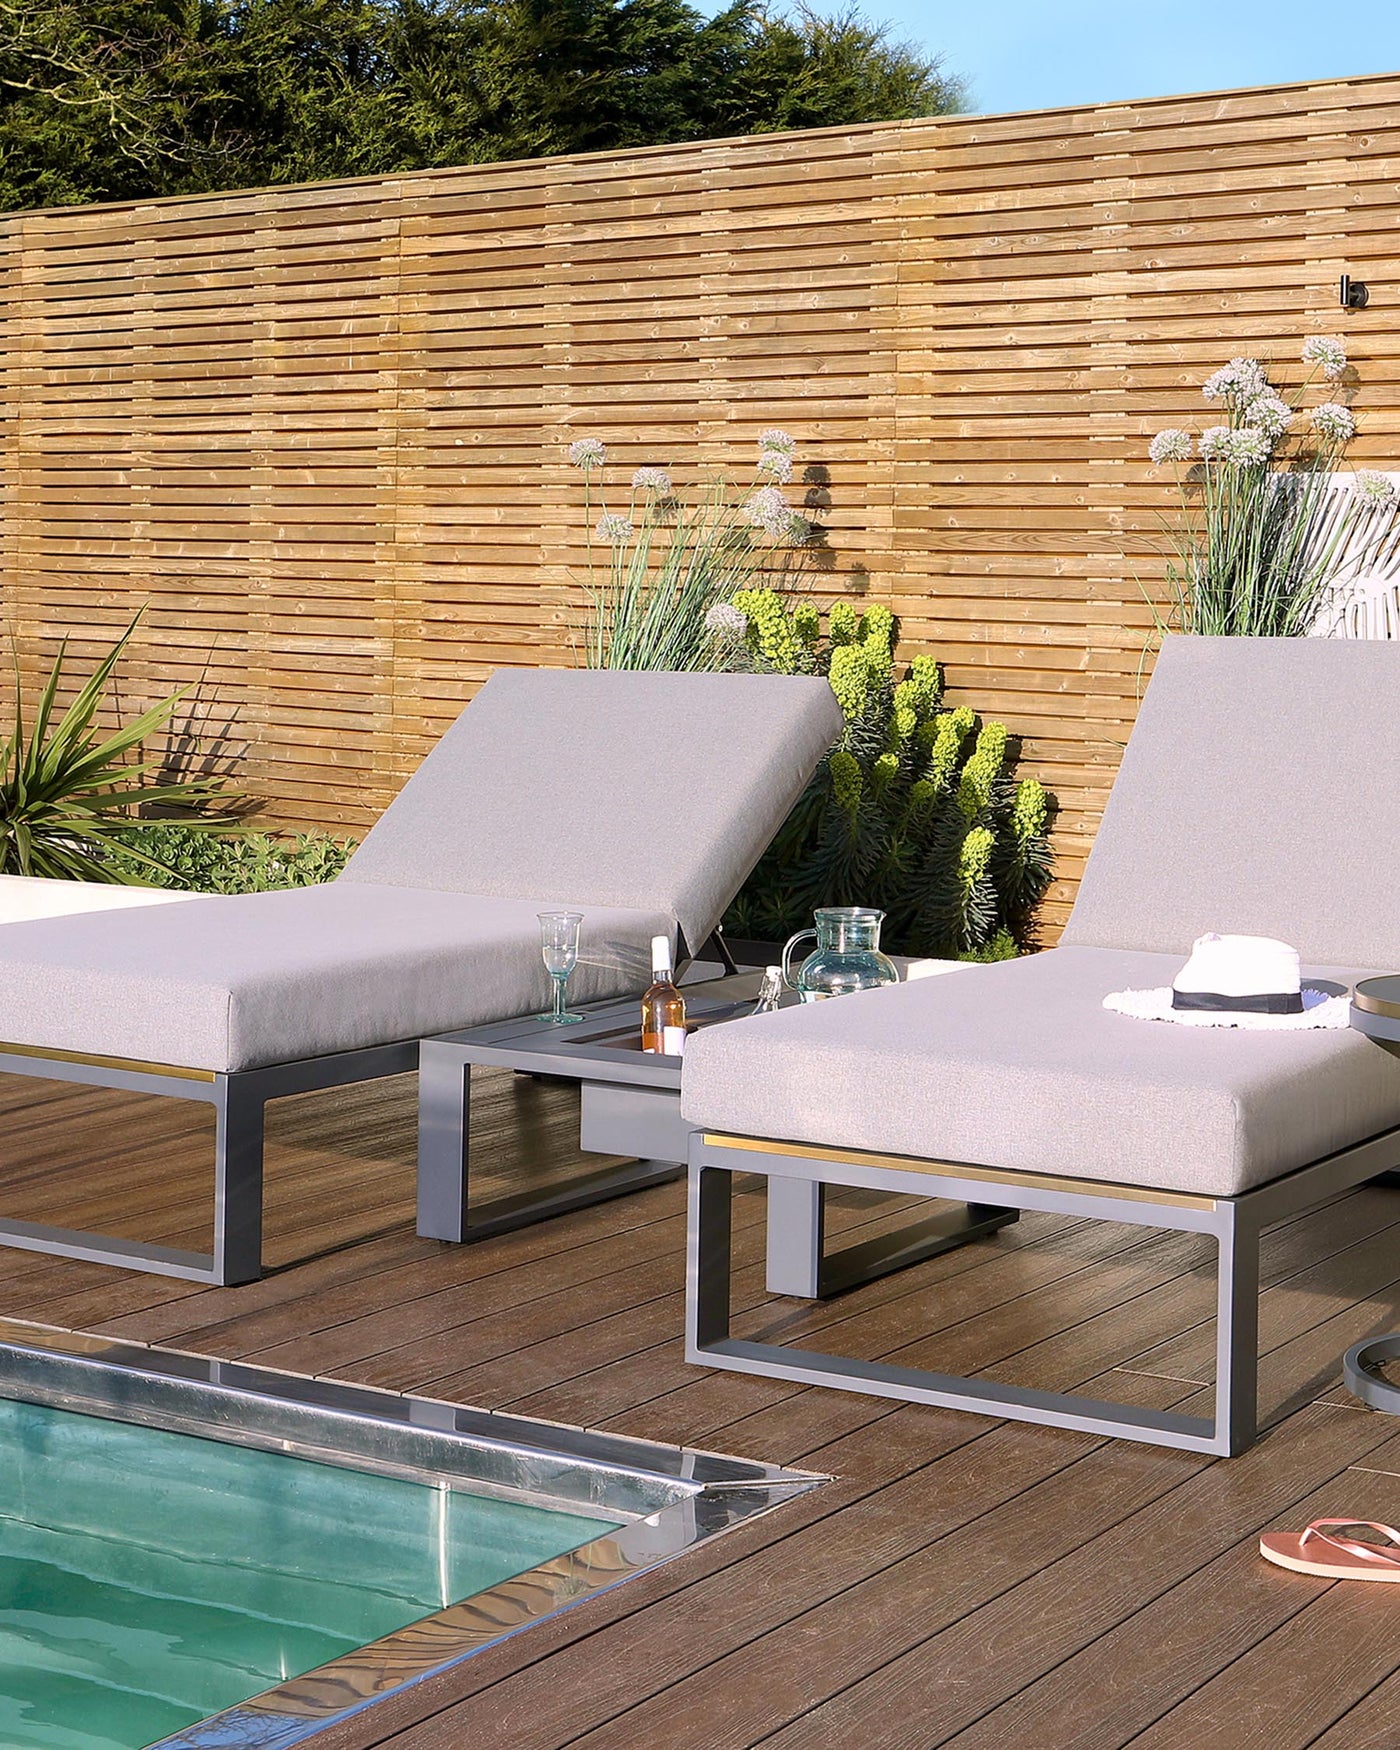 Two modern outdoor lounge chairs with light grey cushions and sleek grey metal frames, situated next to a small matching metal side table with a glass top, all displayed on a wooden deck beside a pool, complemented by a background of lush plants and a wooden slat fence.